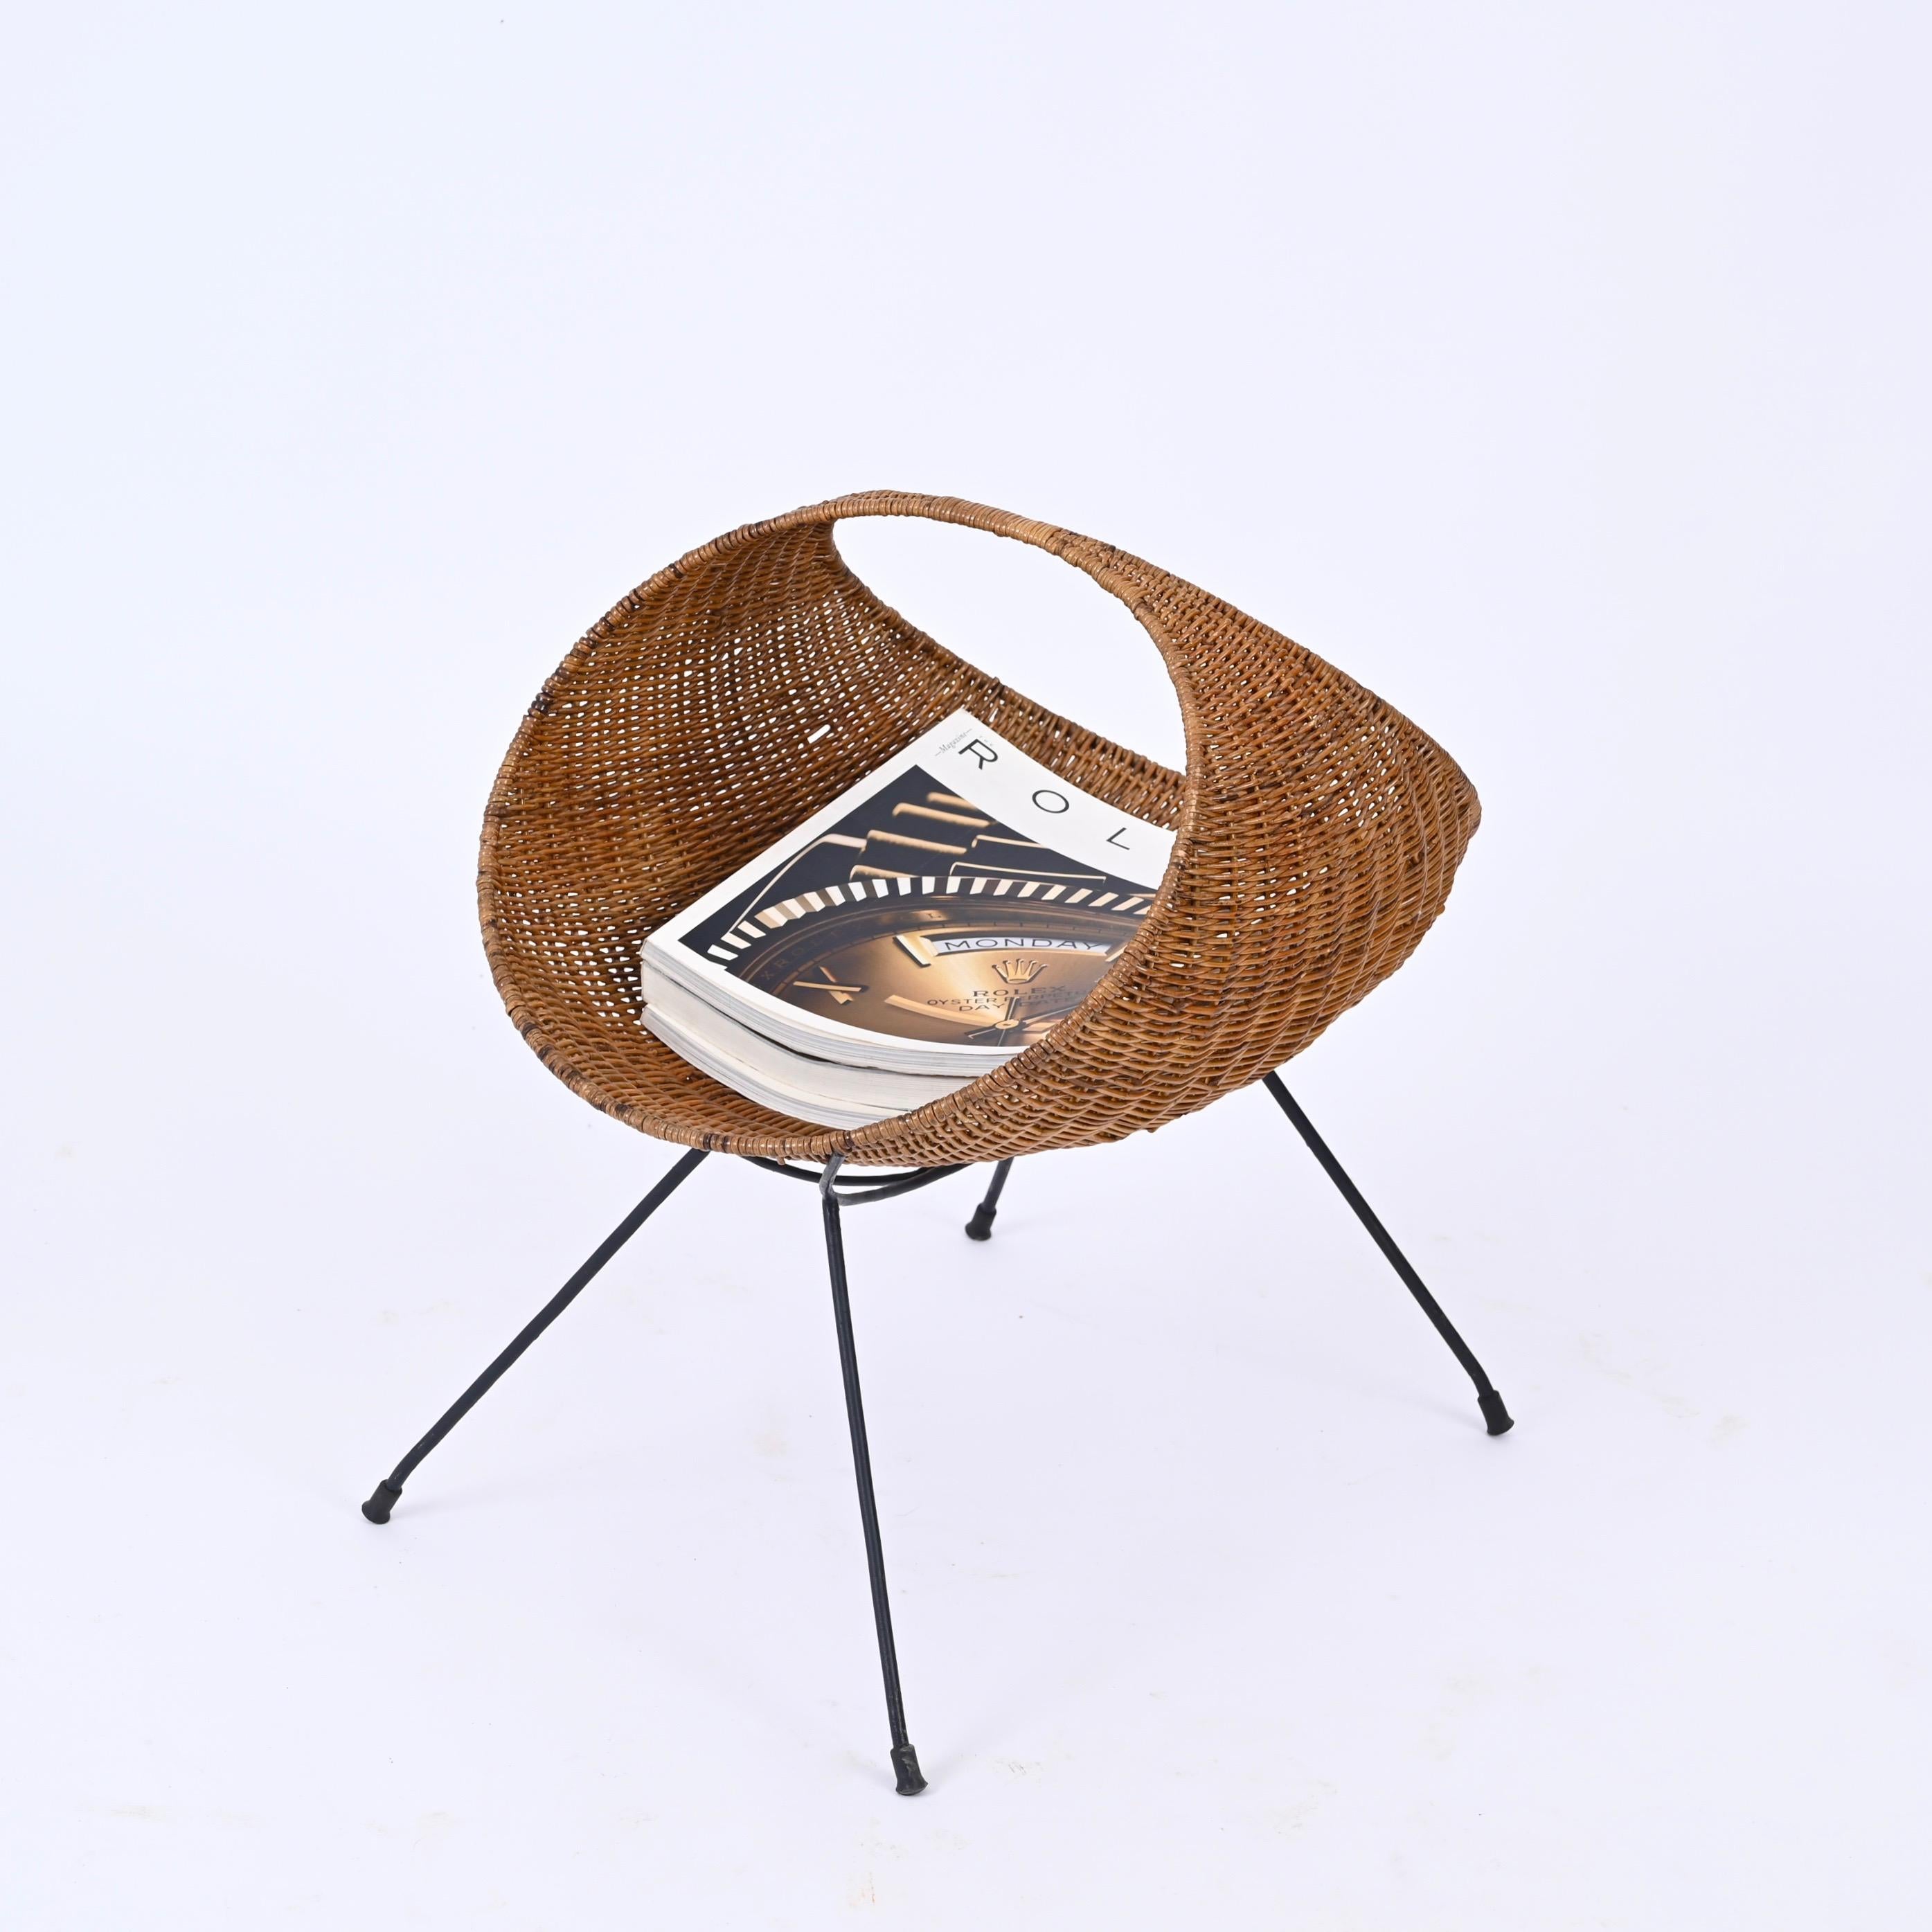 Campo & Graffi Magazine Rack in Wicker and Black Enameled Iron, Italy 1950s For Sale 2